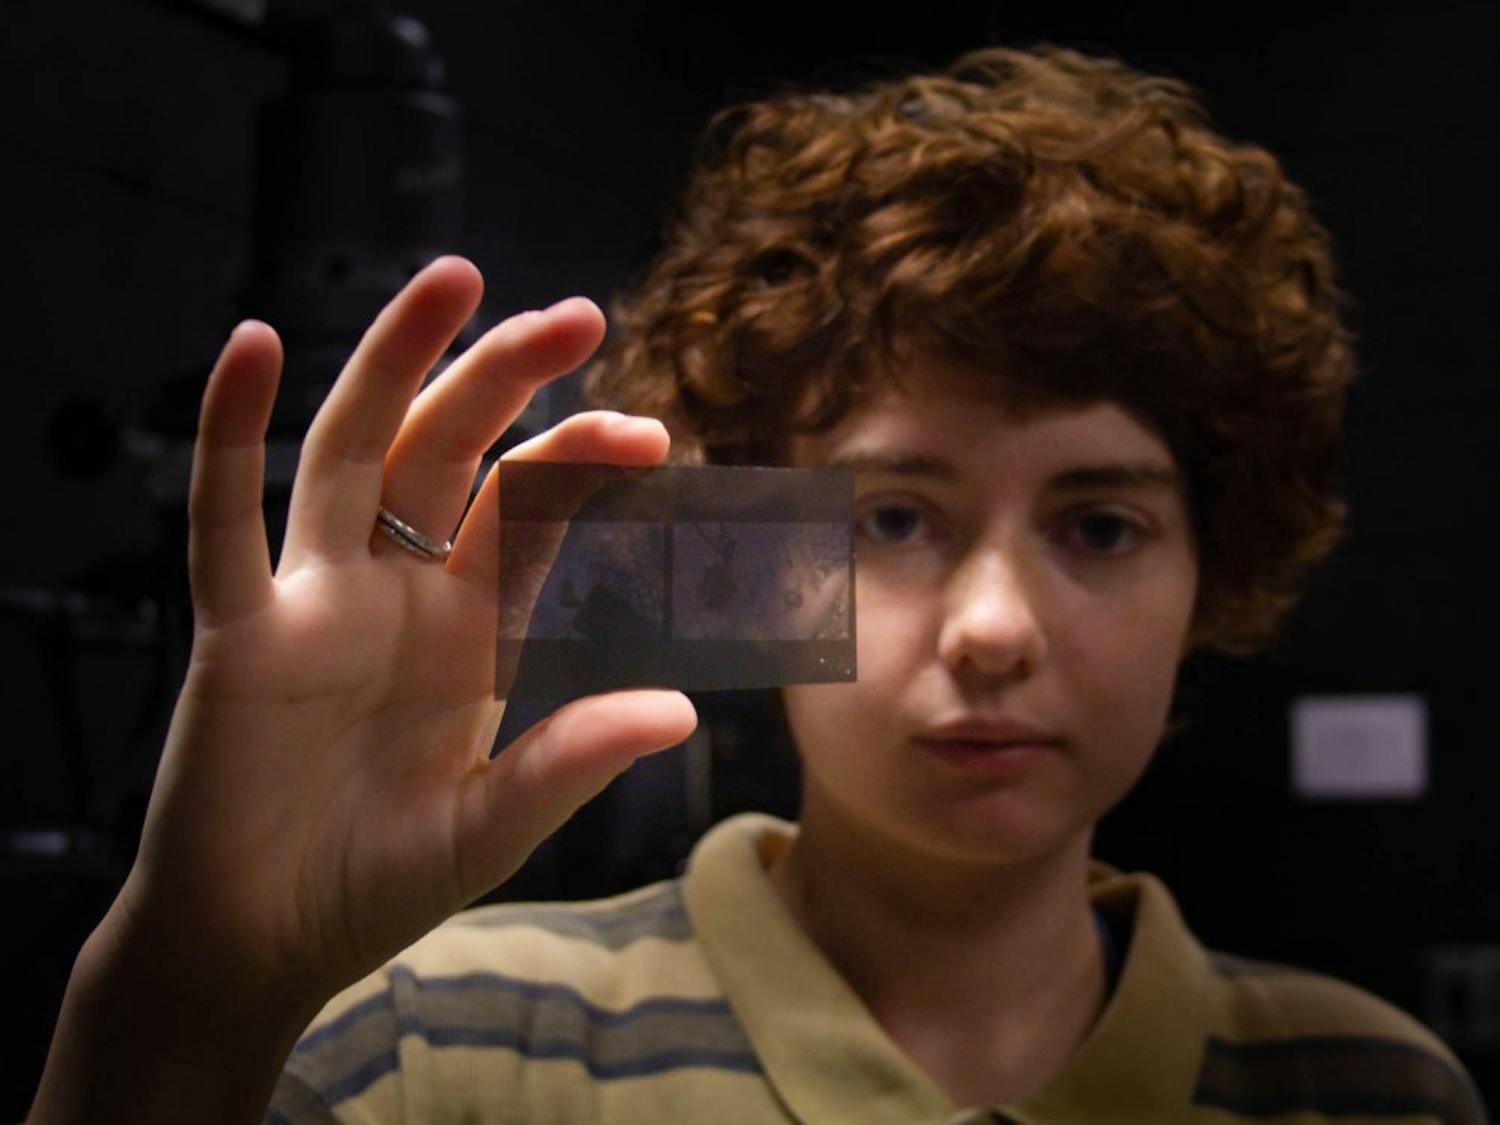 Sophie Payne, a sophomore English major at UNC, holds a lithofilm negative which she will use to get higher contrast in her final enlargened print in an advanced Darkroom Photography class on Thursday, Oct. 10, 2019. "I always push my film which means that my film has more contrast. I like blacks and whites, I don't like as many greys. So, a lot of my images are intense," Payne said.